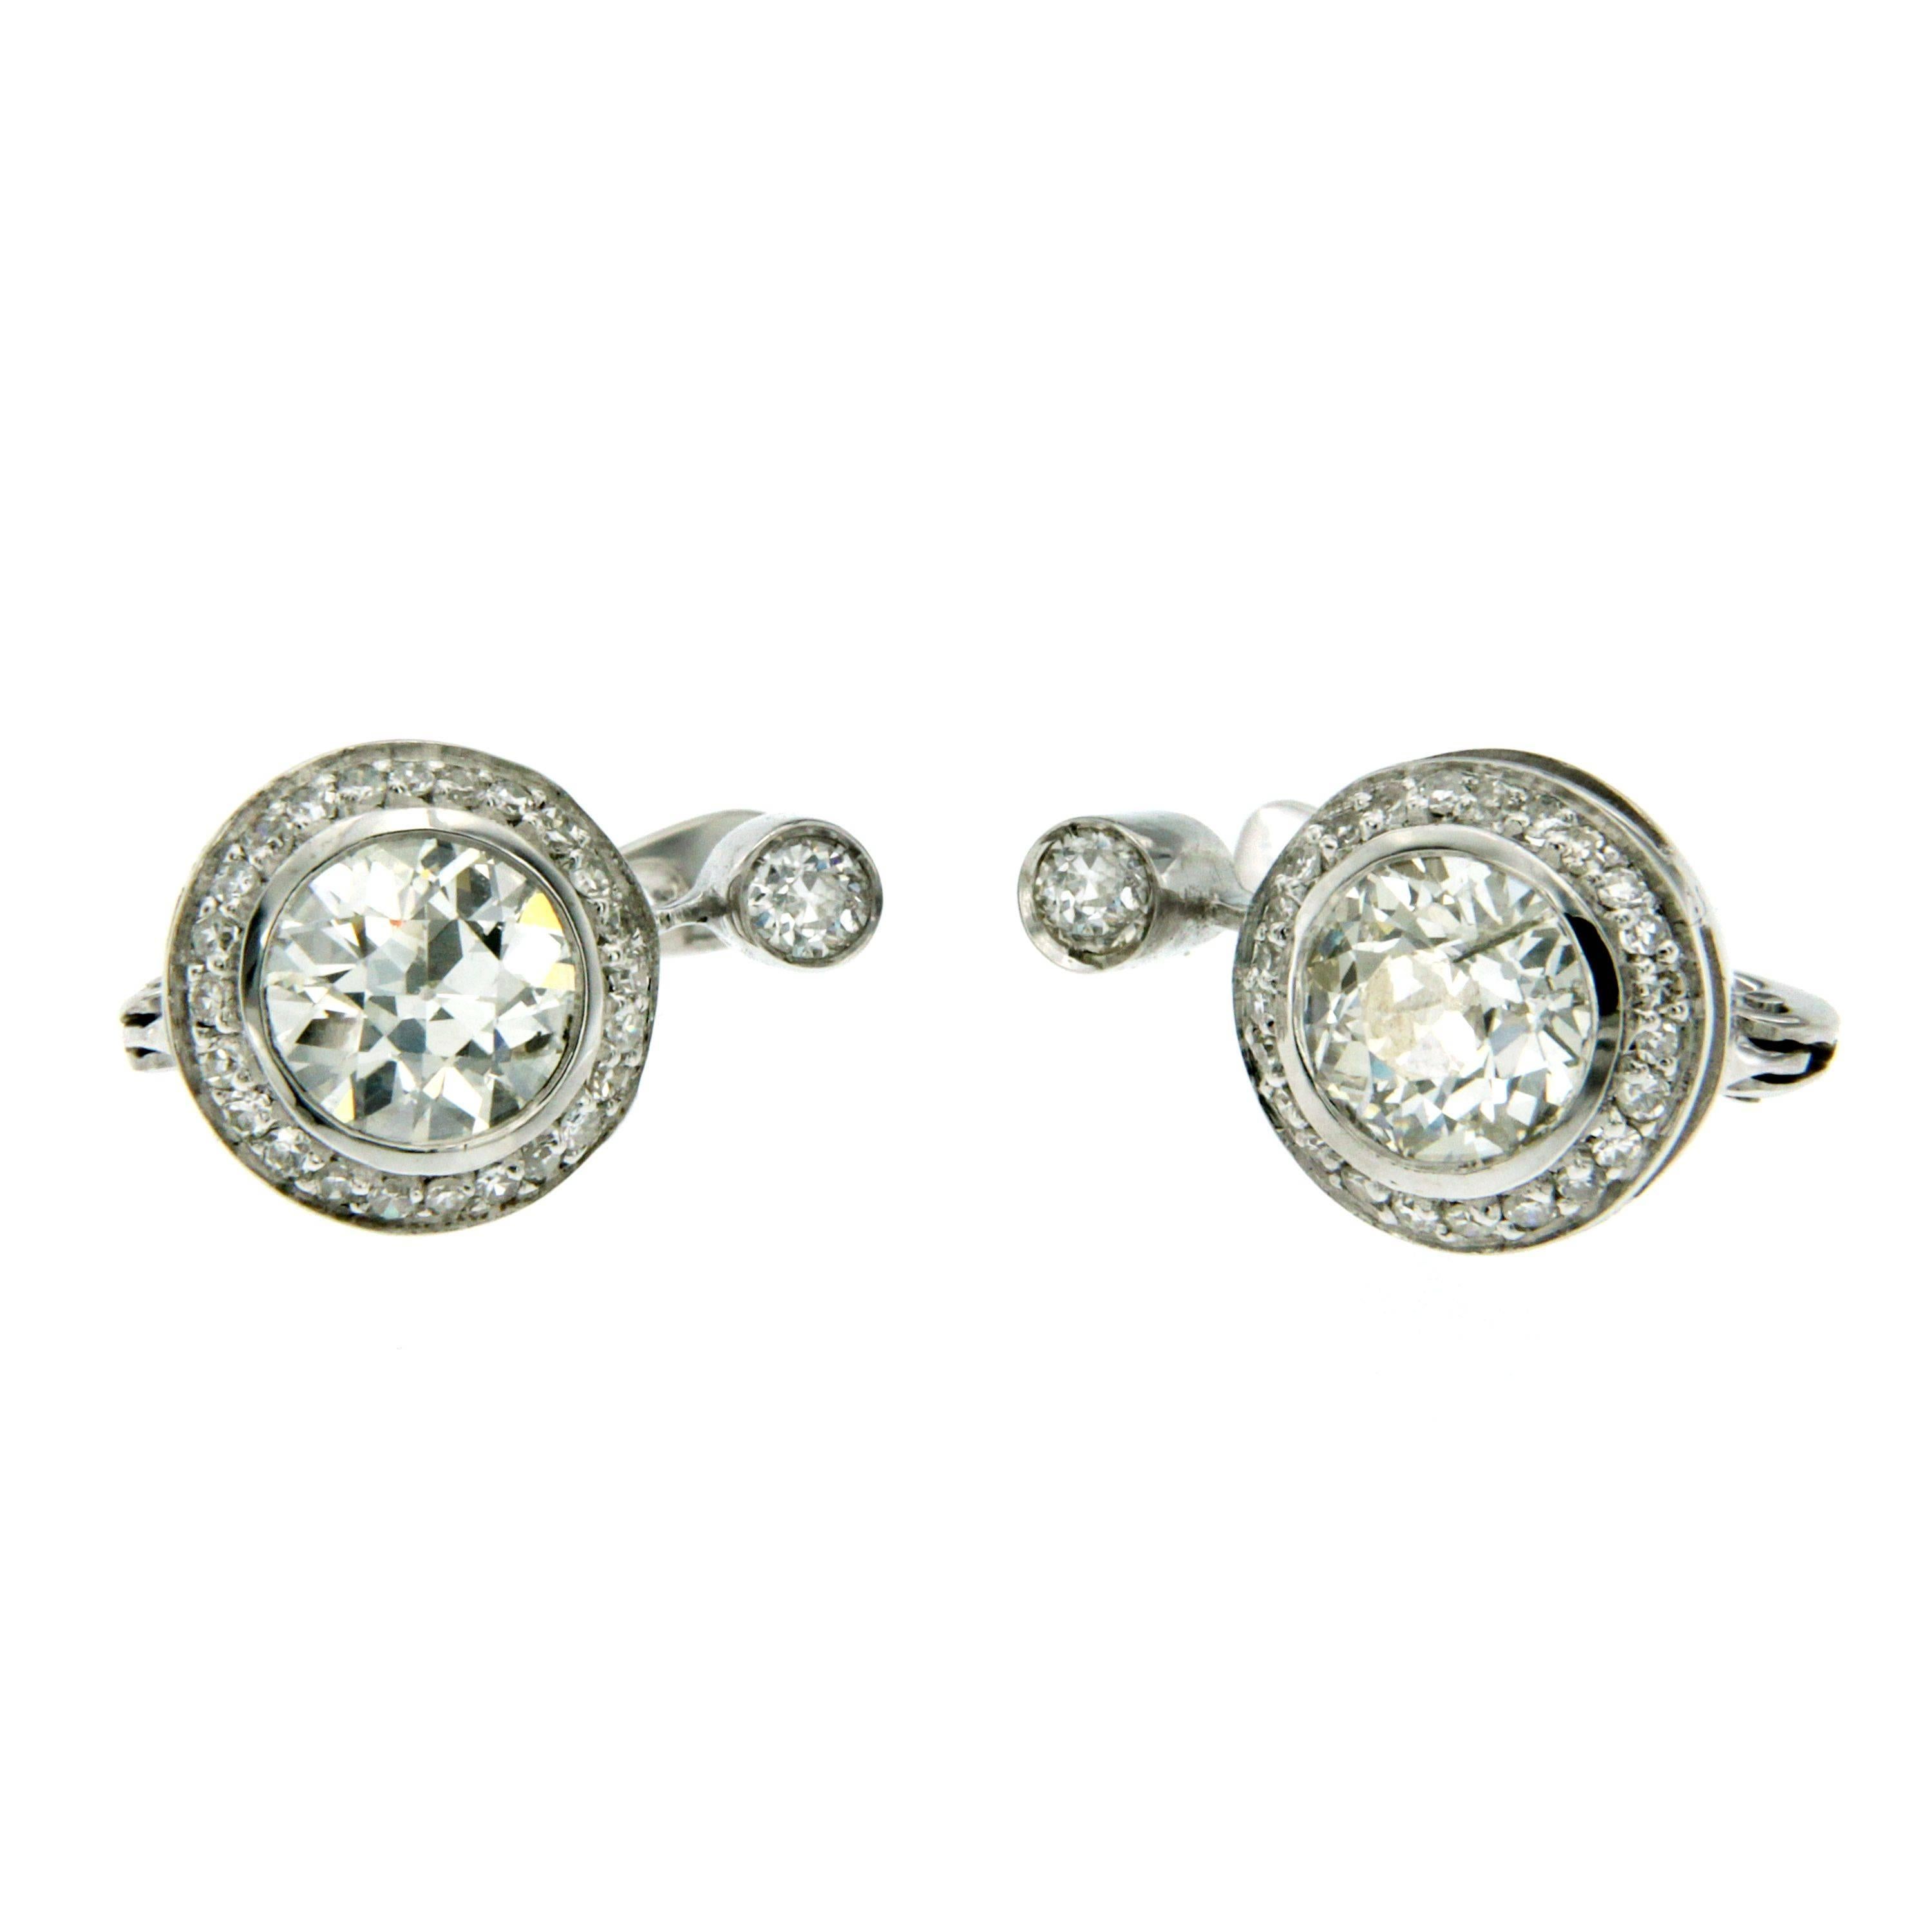 18k white Gold drop earrings consisting of 2 Old mine cut diamonds having a total weight of approximately 2.40 carats I color I1  clarity, combined and topped with 0.20 carats of old mine cut diamonds G-H color.  Circa 1960

CONDITION: Pre-owned -